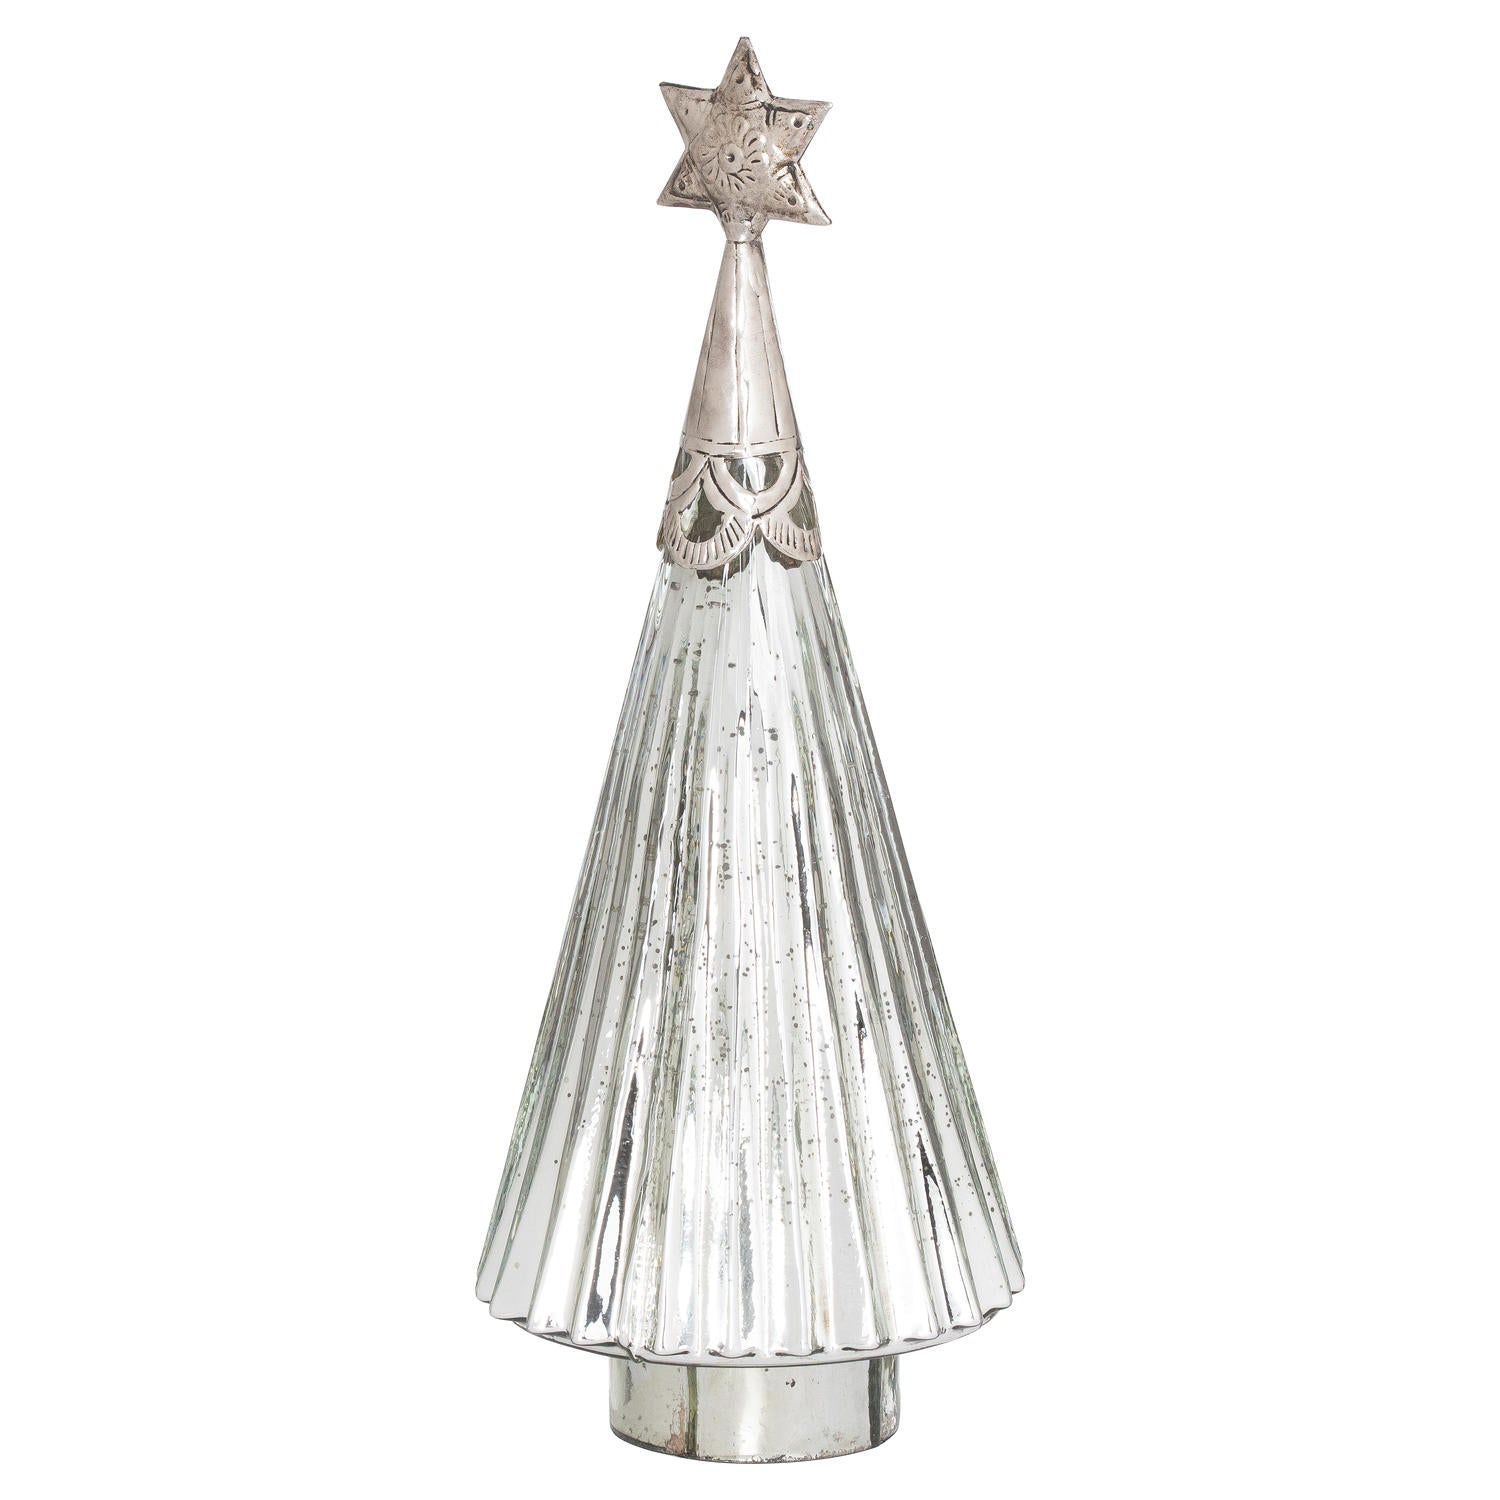 View The Noel Collection Star Topped Glass Decorative Medium Tree information